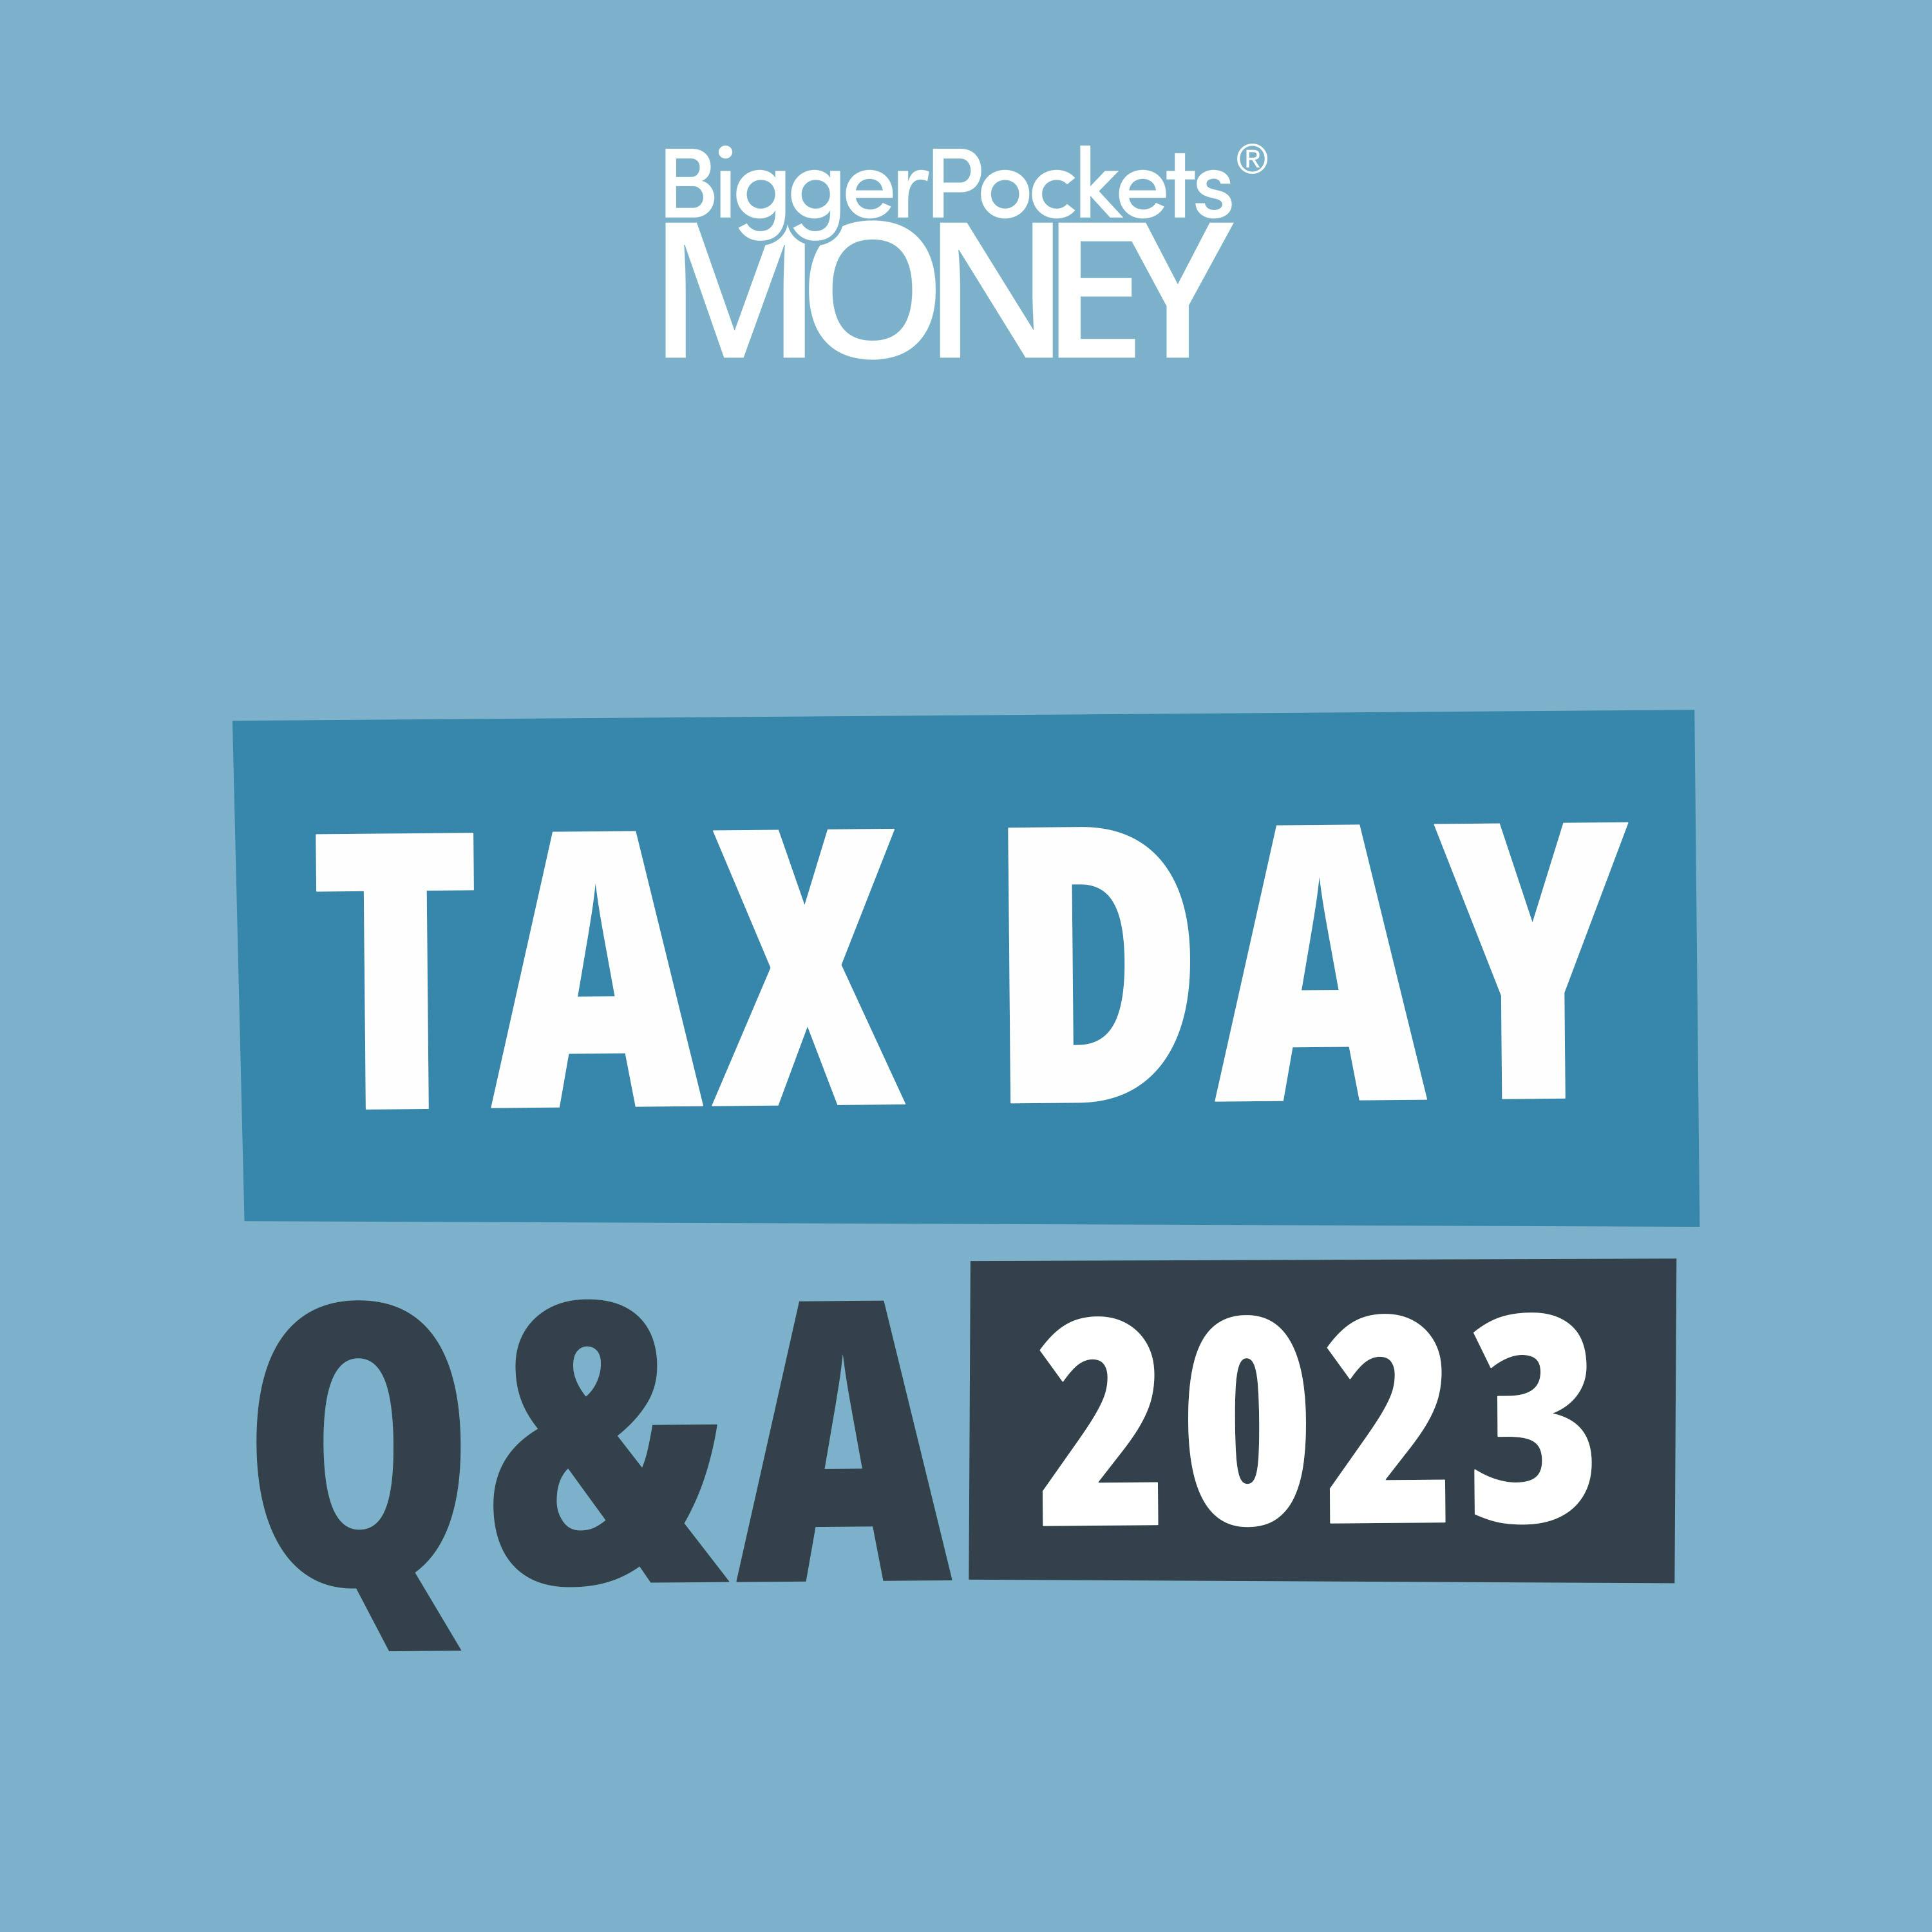 402: Tax Day Q&A: Live CPAs Help YOU Owe Less To the IRS